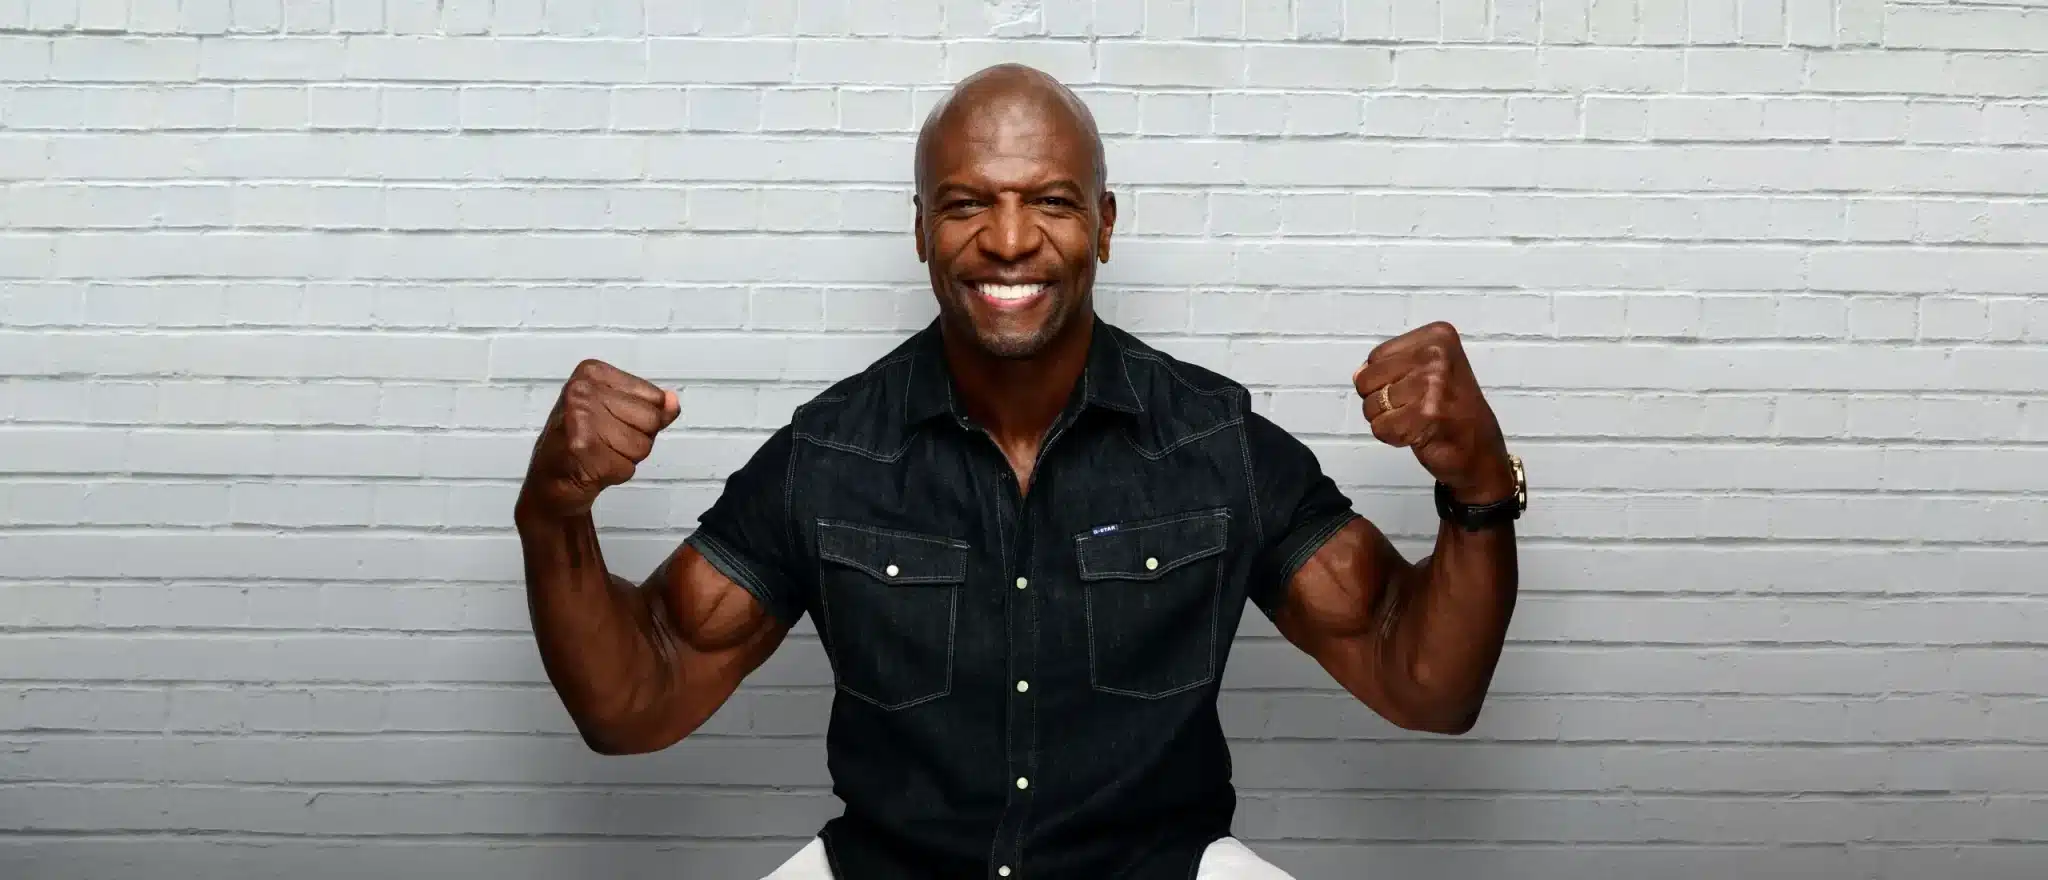 Terry Crews, 54, Is in Way Better Shape Than You. Here’s How